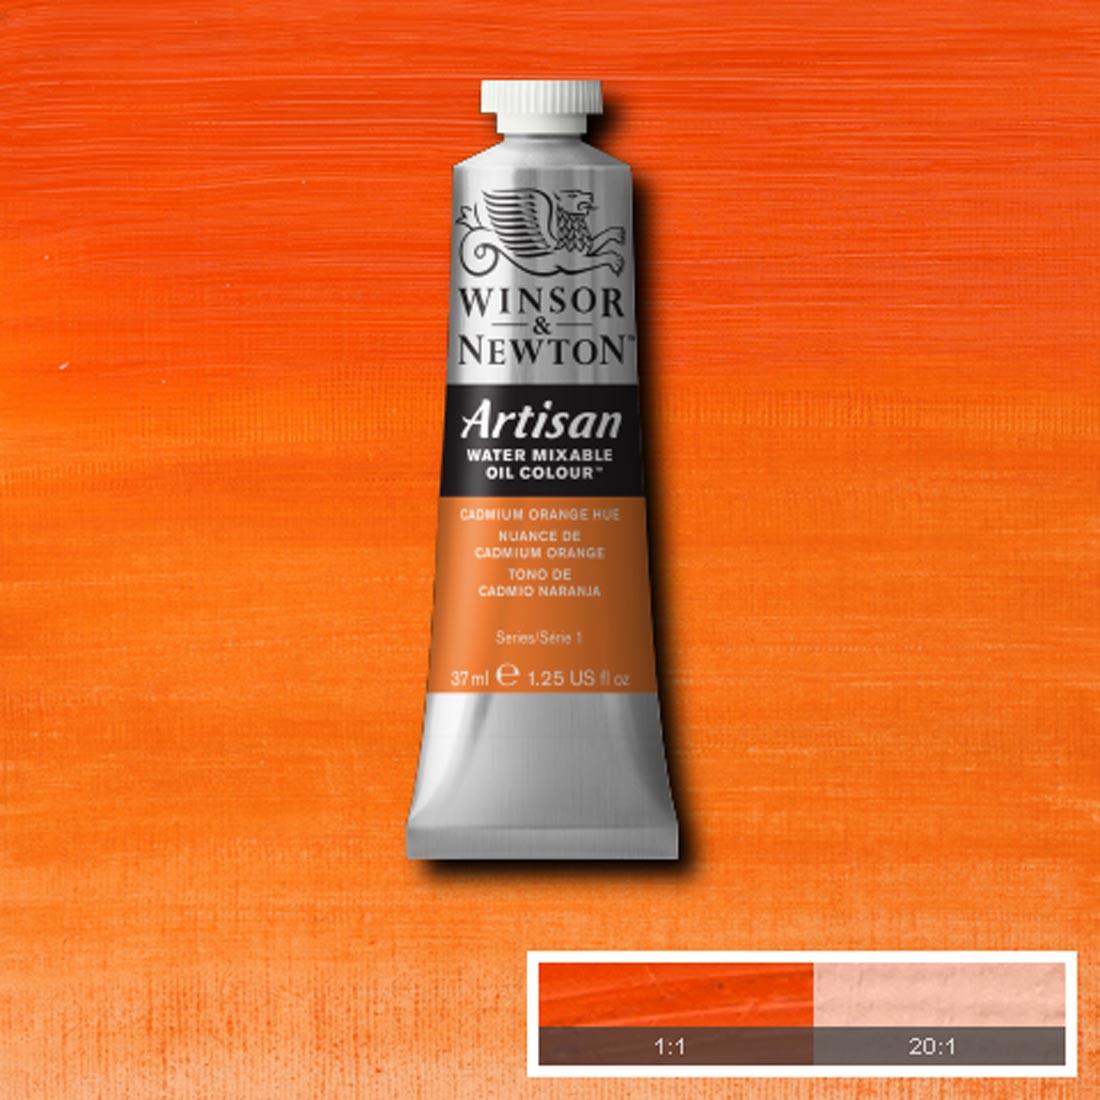 Tube of Cadmium Orange Hue Winsor & Newton Artisan Water Mixable Oil Colour with a paint swatch for the background